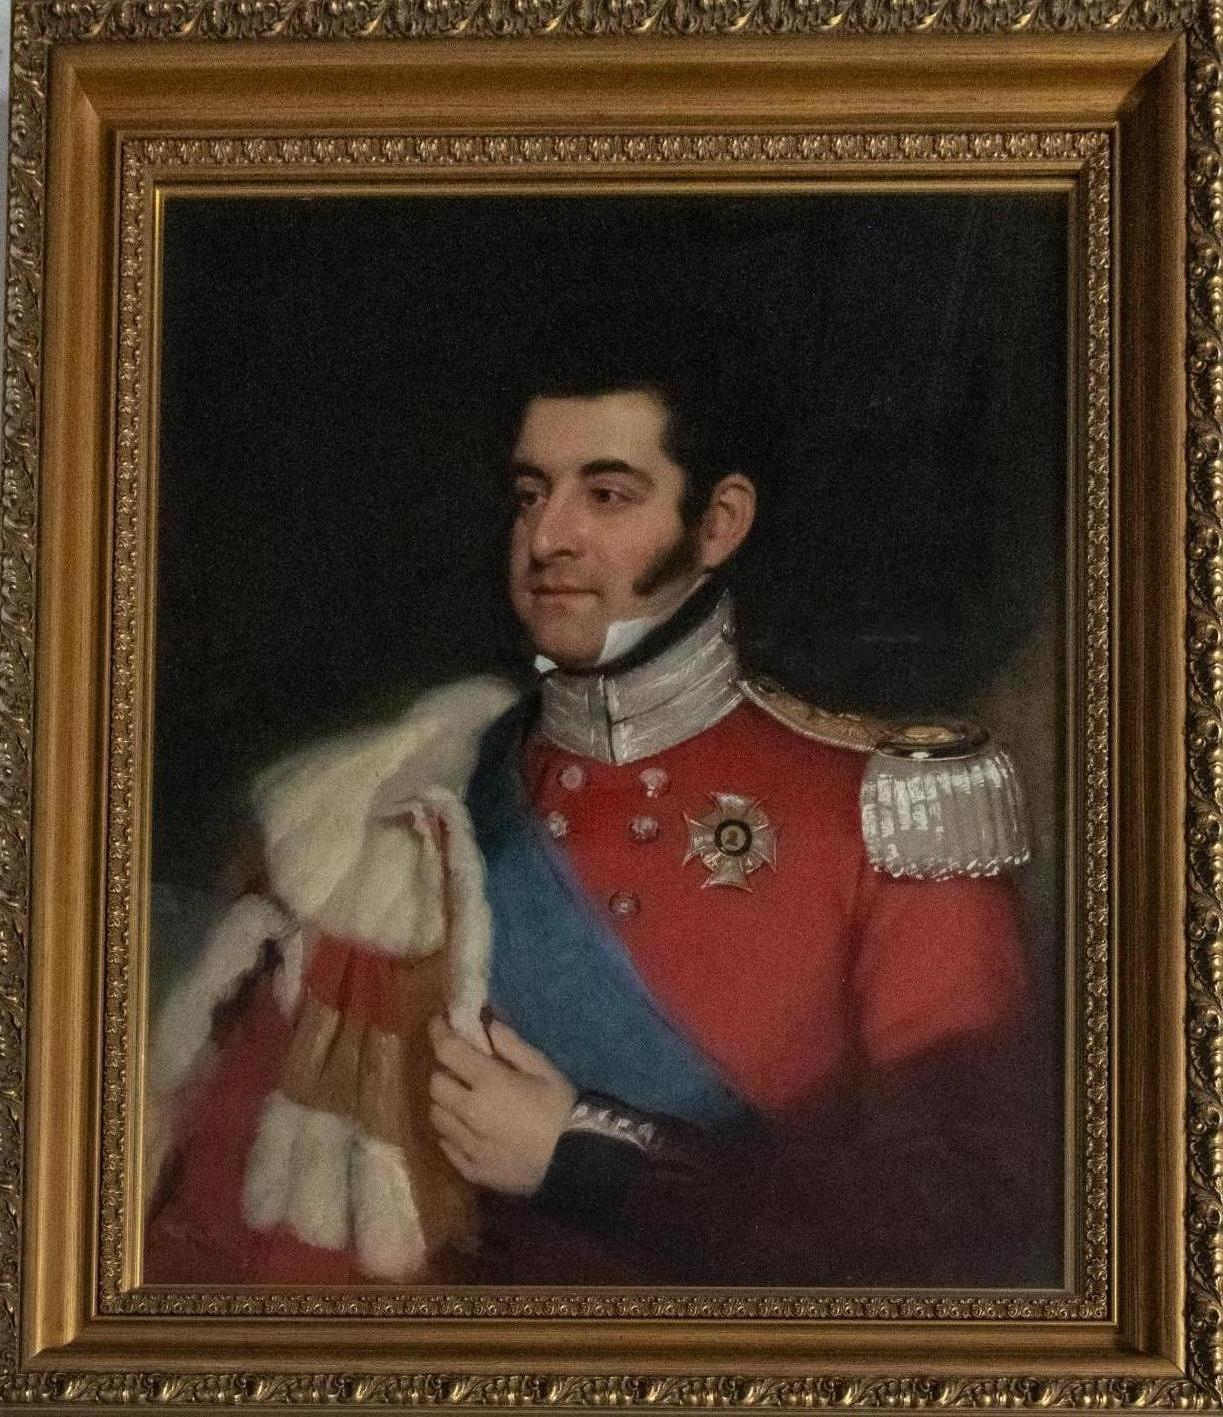 A fine 19th century oil on canvas portrait stated to be Captain Paul John Henry Butler, 5th Royal Lancashire Militia, half length, wearing breast star. Housed in a gilt frame which is glazed to protect the painting
 The size of the painting being